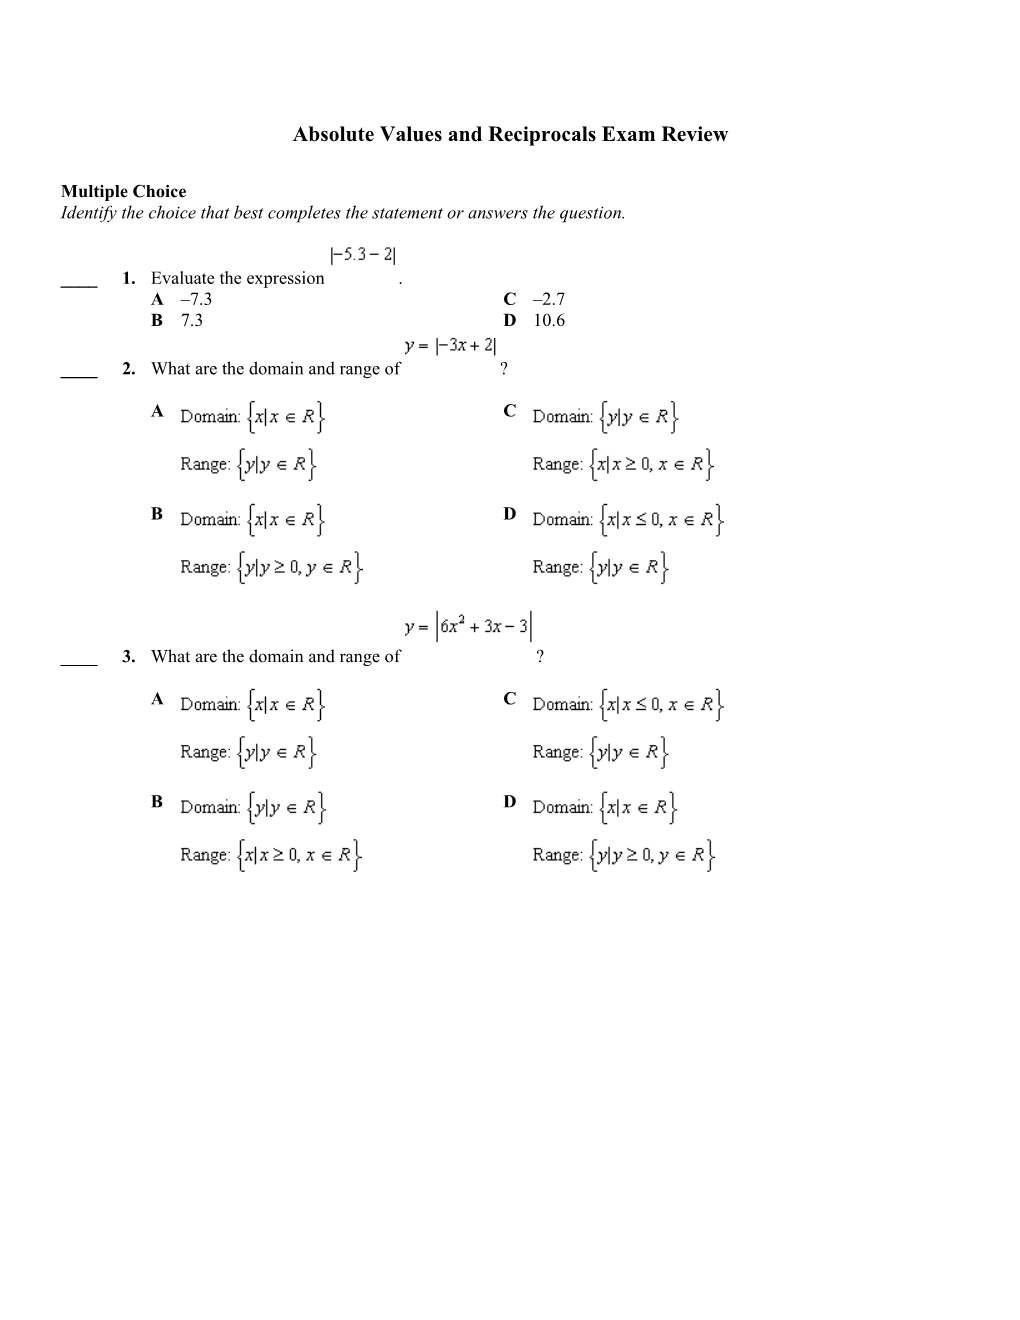 Absolute Values and Reciprocals Exam Review